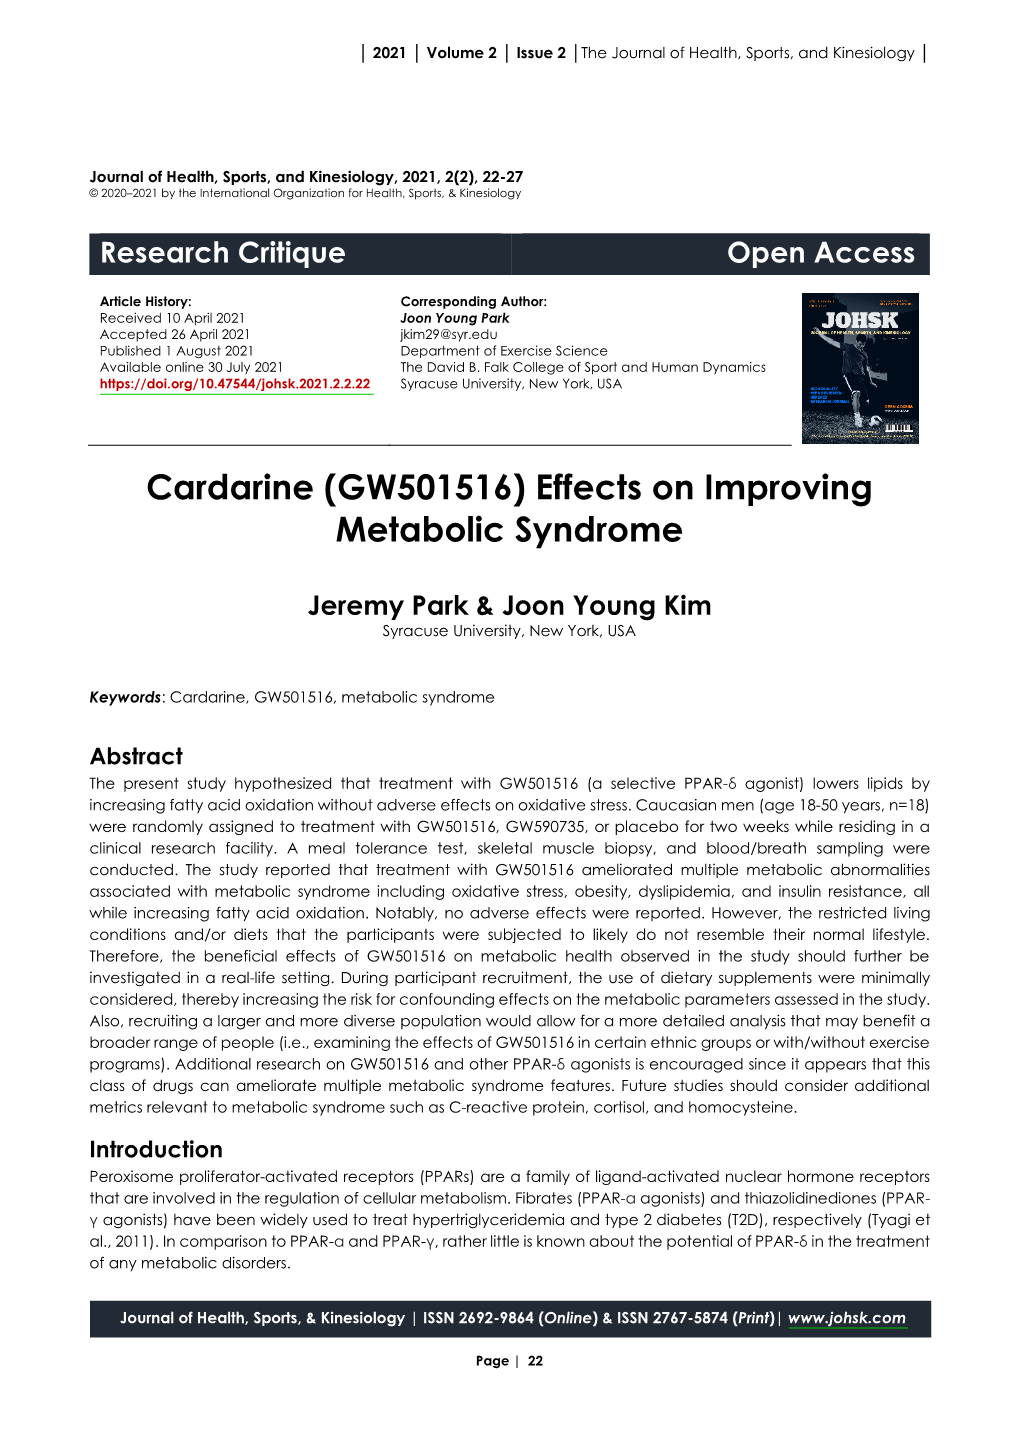 Cardarine (GW501516) Effects on Improving Metabolic Syndrome